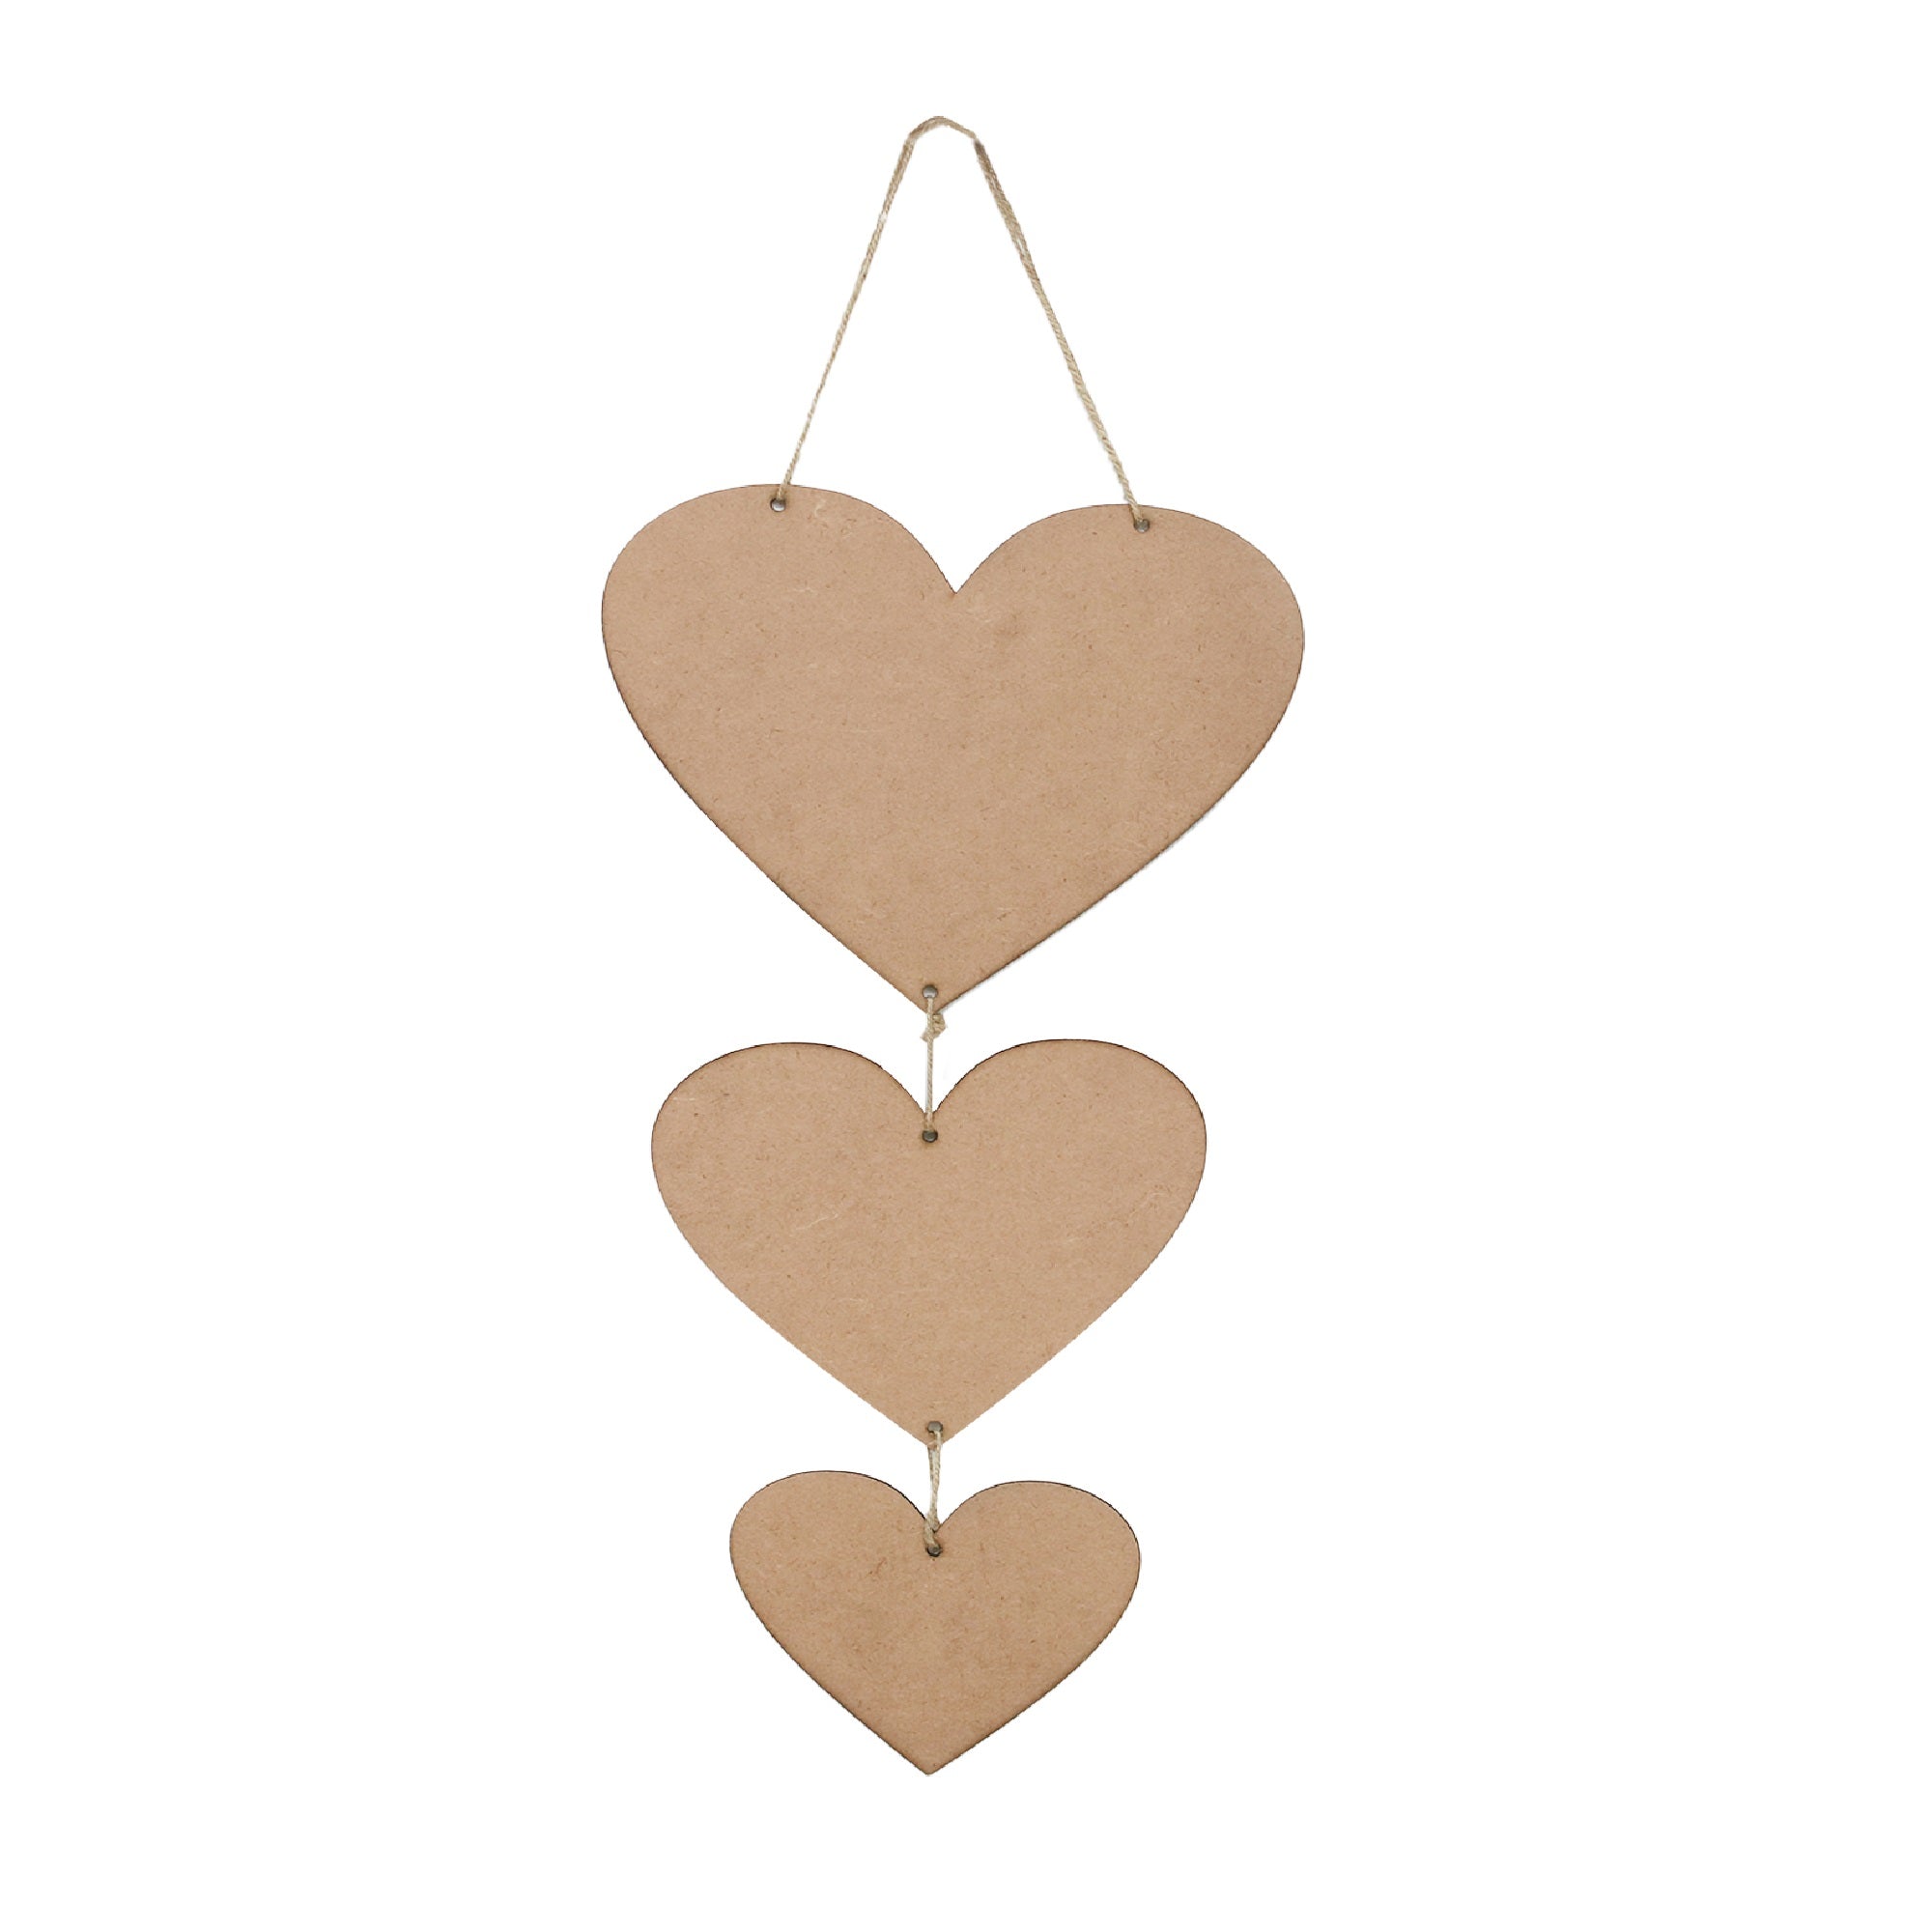 Mdf Hanging Heart With Jute Twine 10 X 8Inch 8 X 6.5Inch 6 X 5Inch 5.5Mm Thick 3Pc Pb Lb